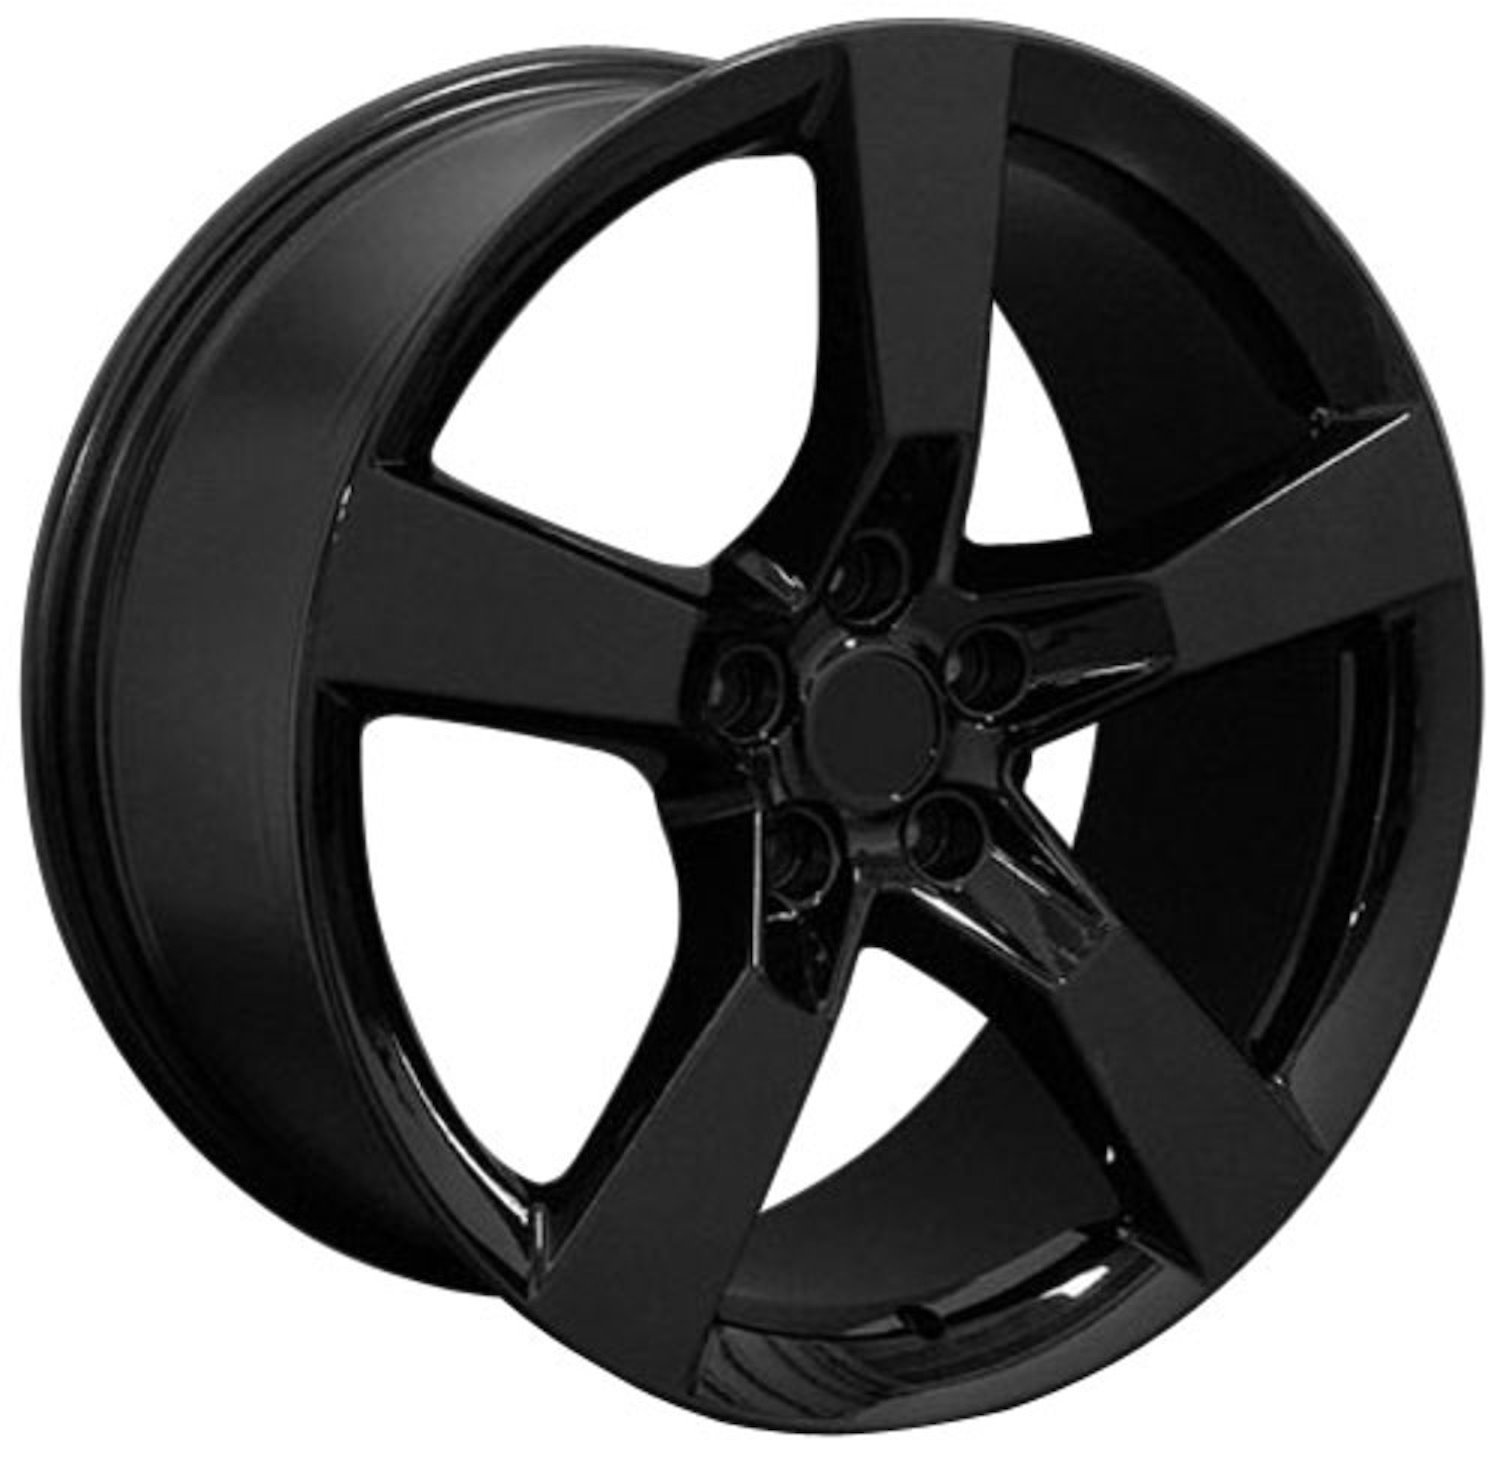 Camaro SS Style Wheel Size: 20" x 9" Bolt Pattern: 5 x 120 Rear Spacing: 6.38" Offset: +35mm